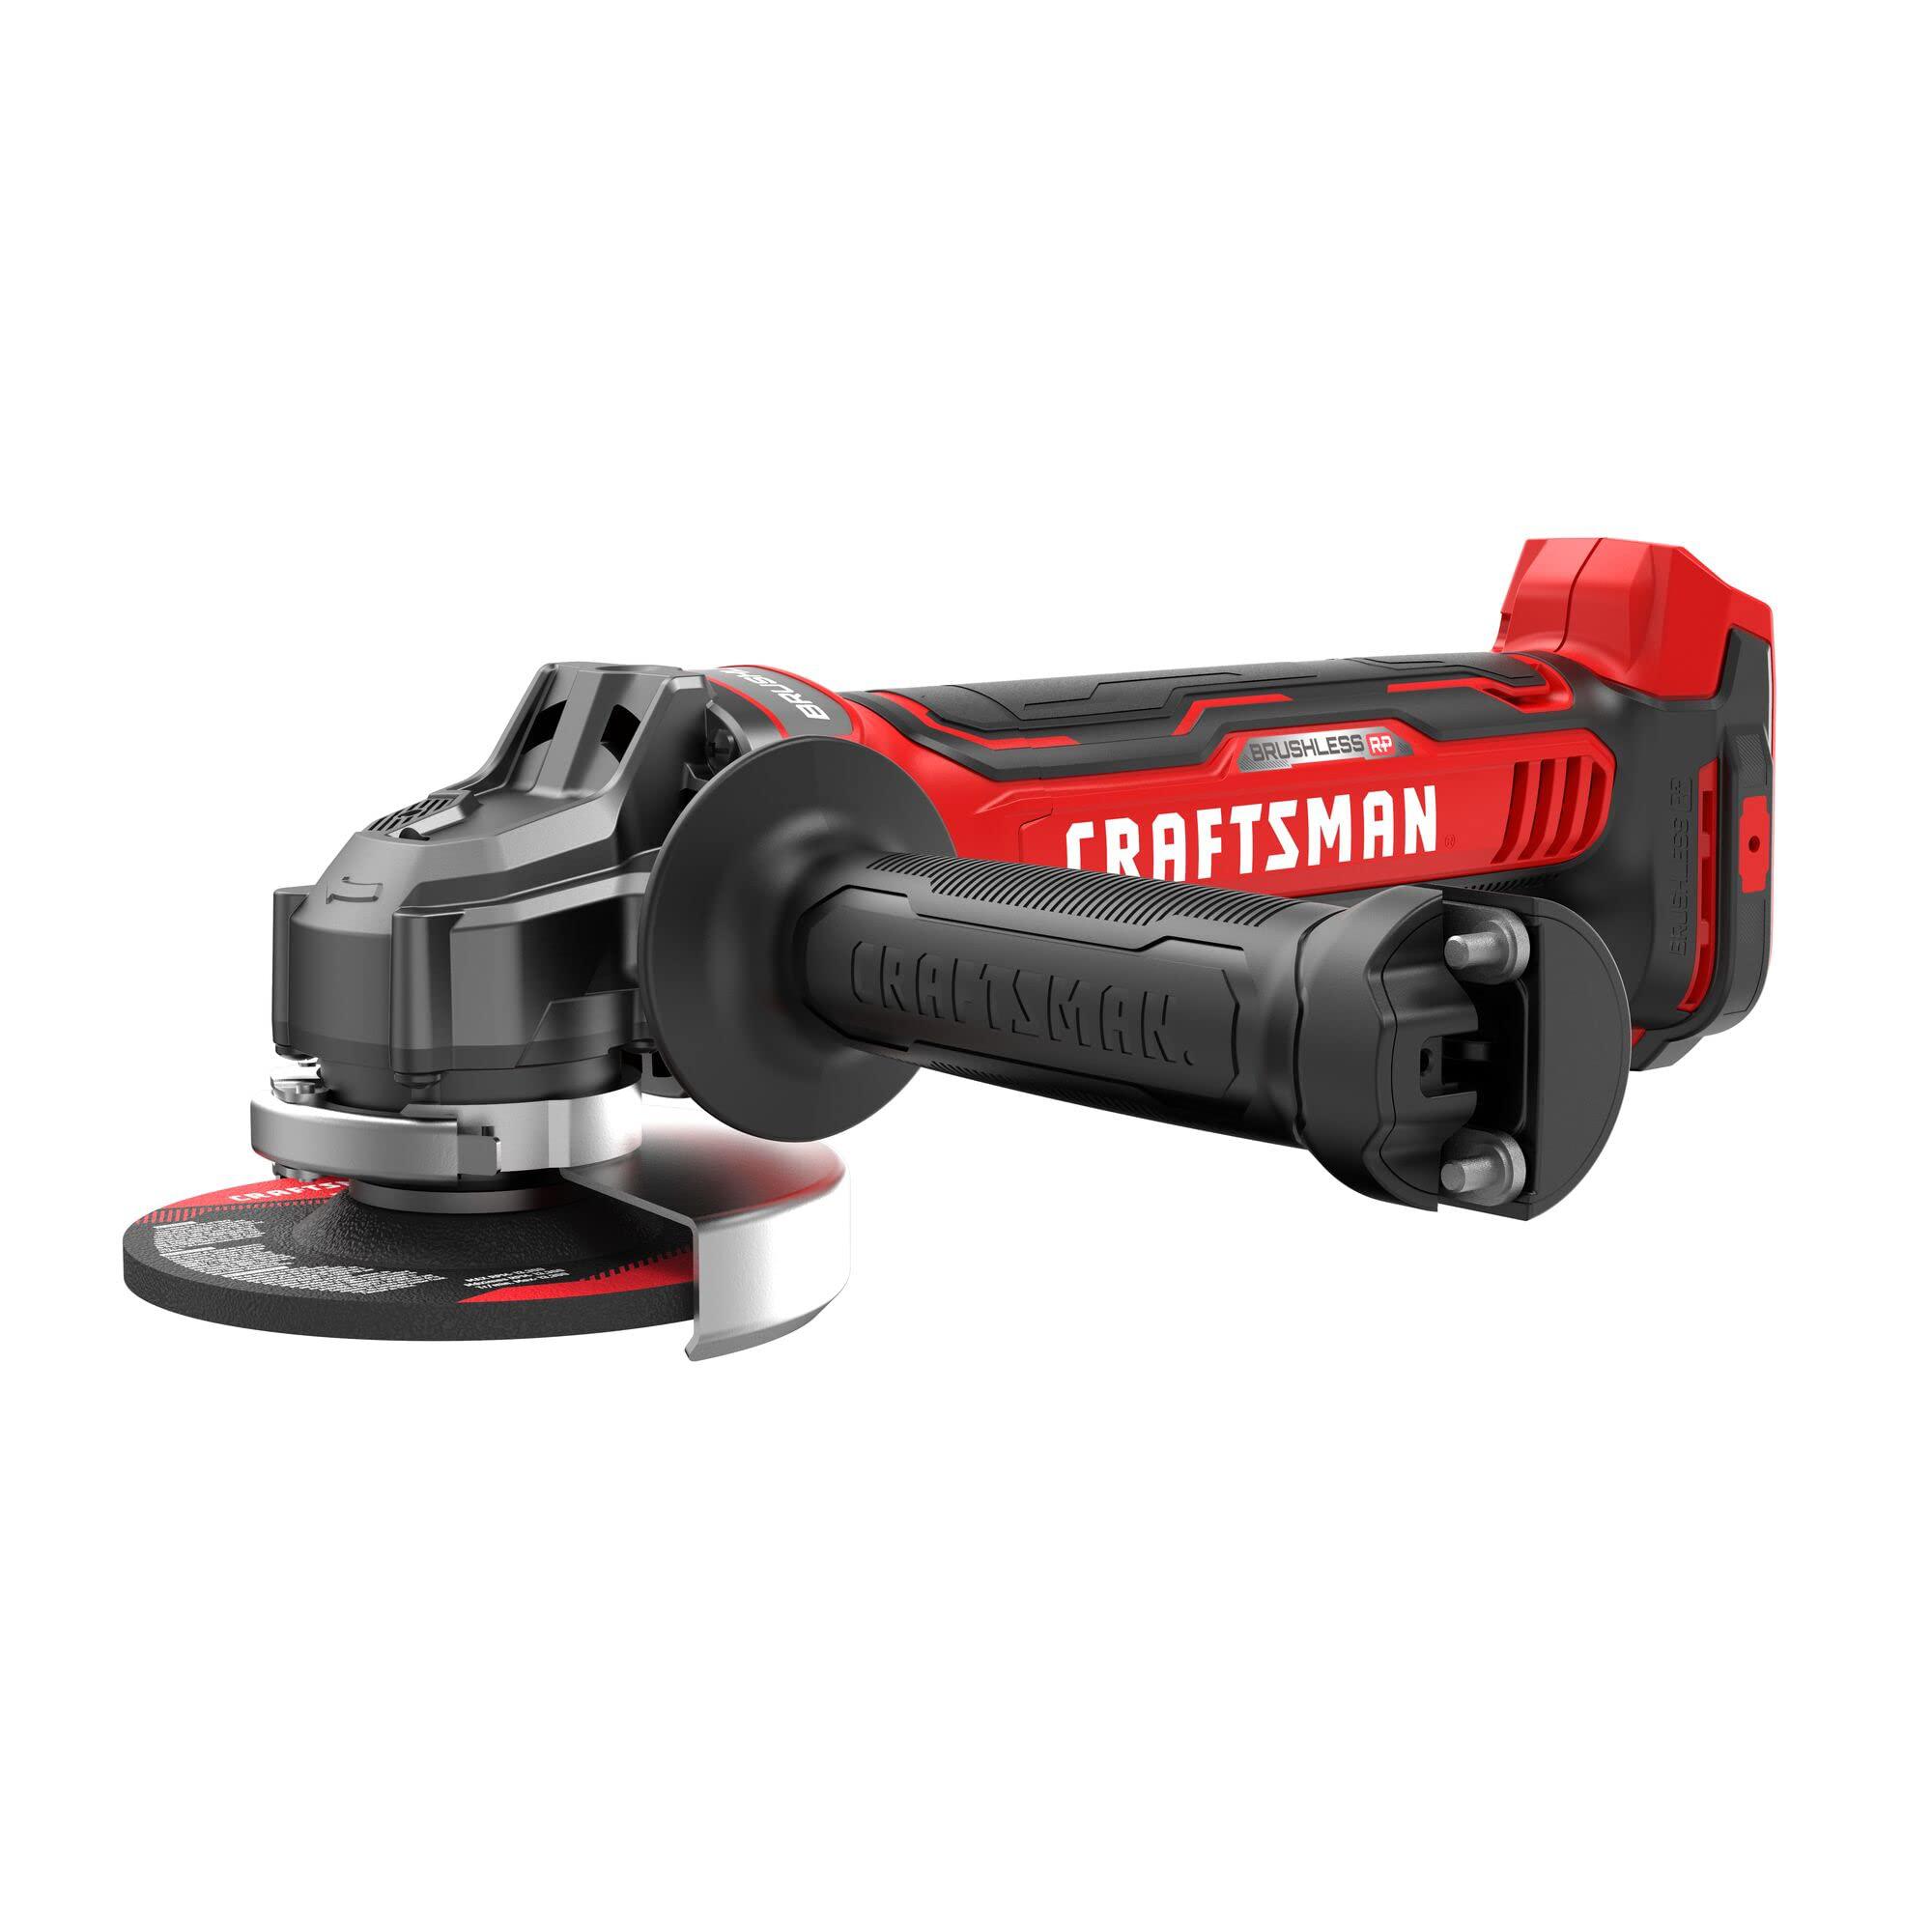 craftsman 20v max brushless cordless angle grinder,paddle switch, tool only (cmcg451b)